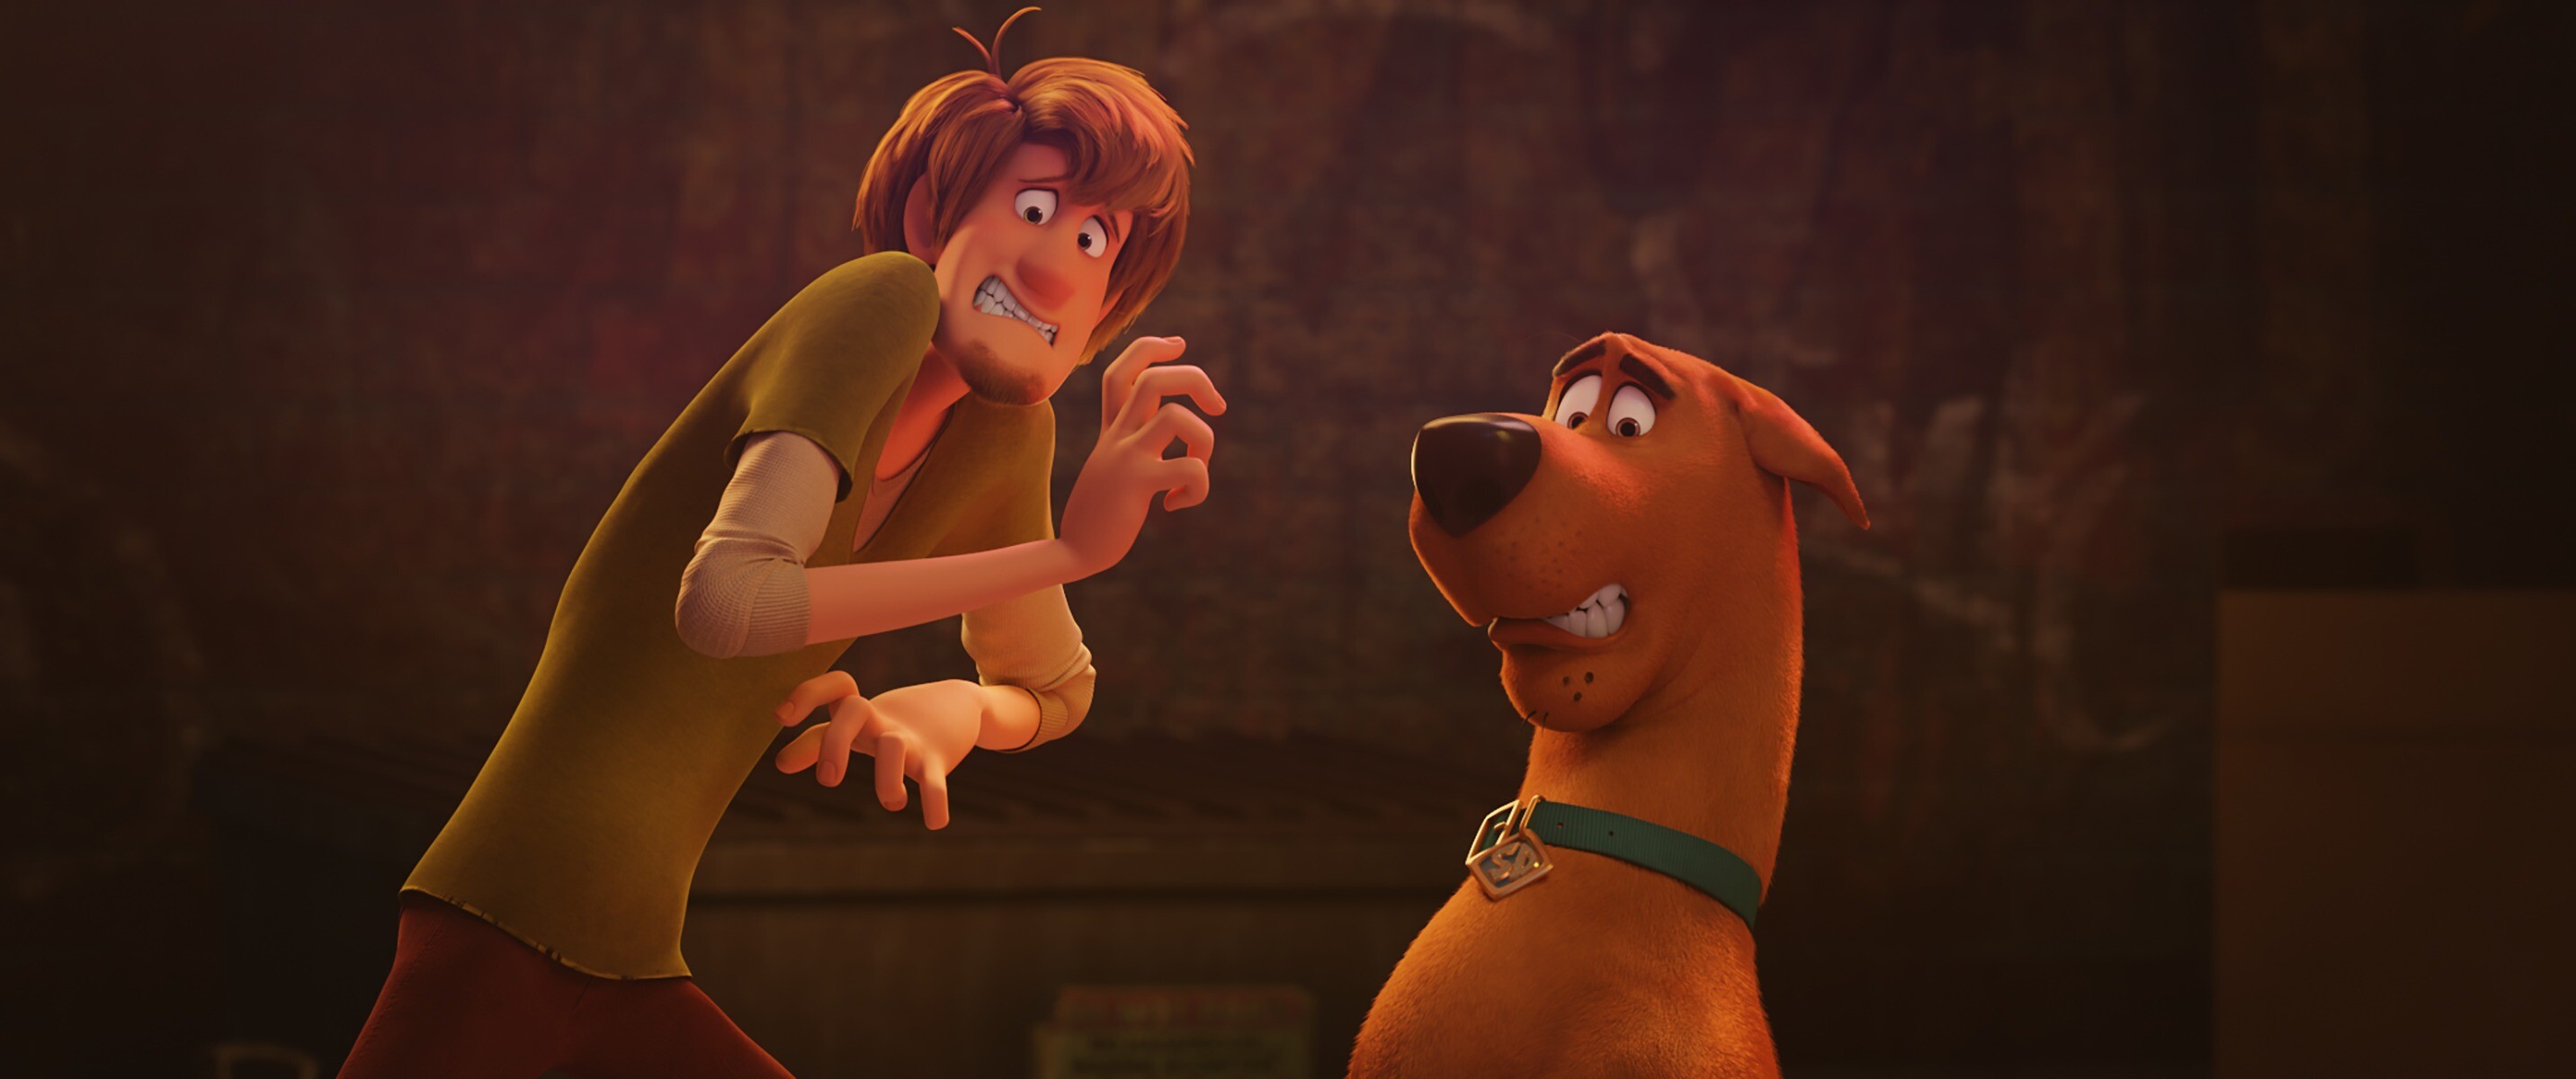 SyncSketch User Story – Reel FX and SCOOB!